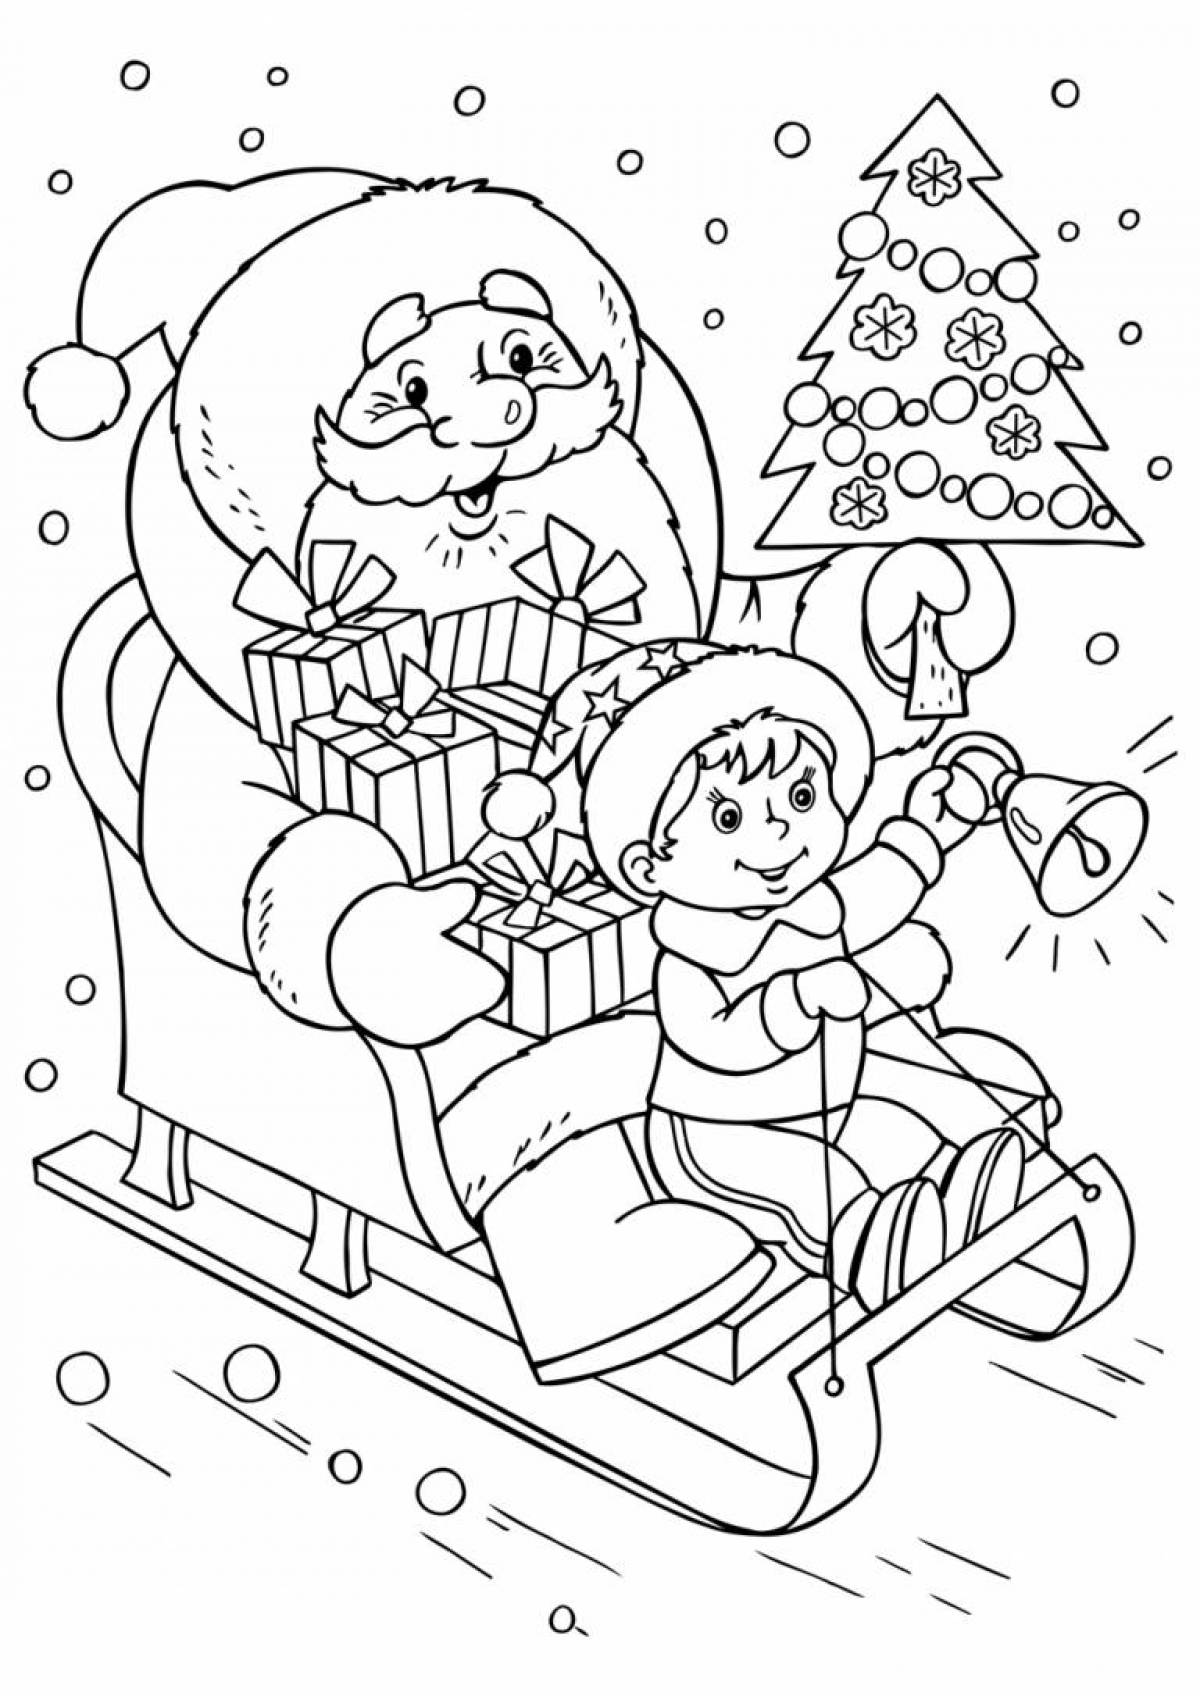 Exotic winter coloring book for kids 6-7 years old